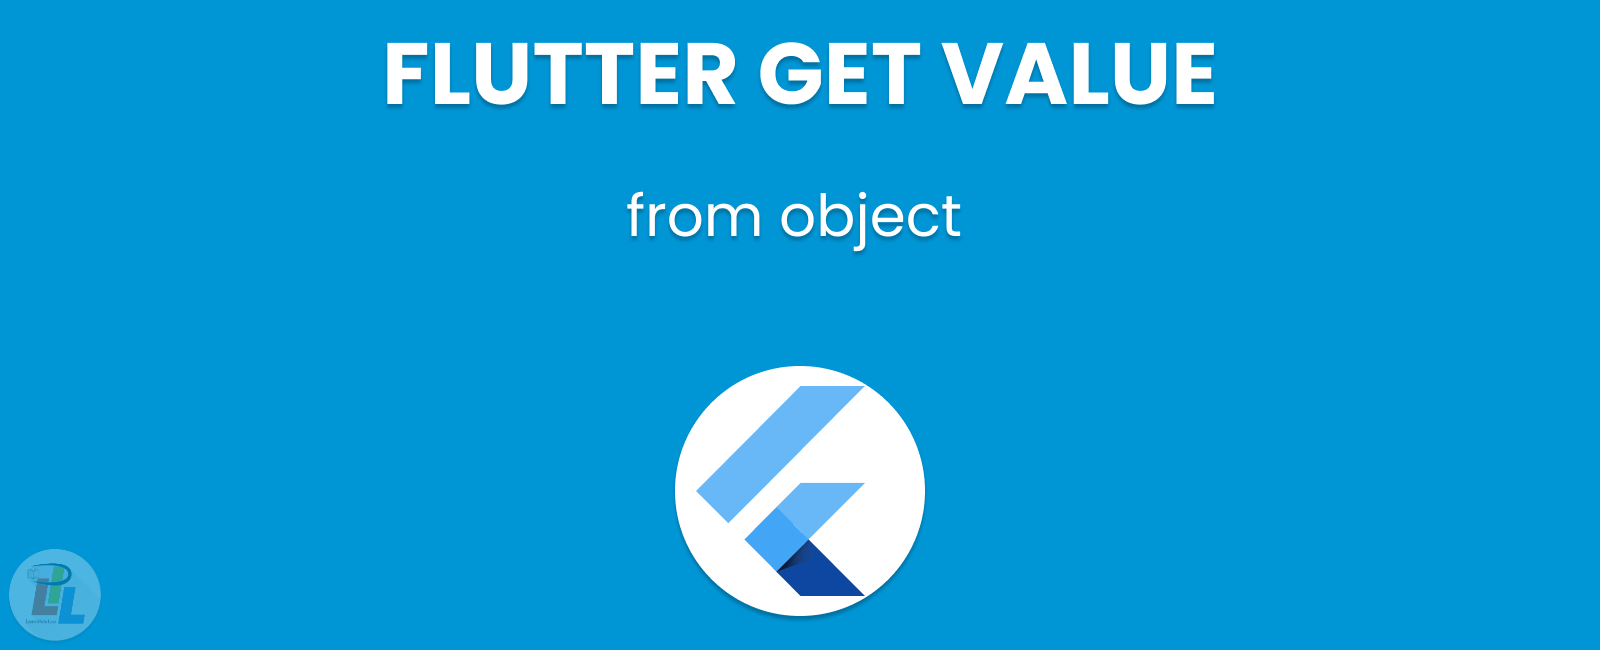 Get value from object flutter